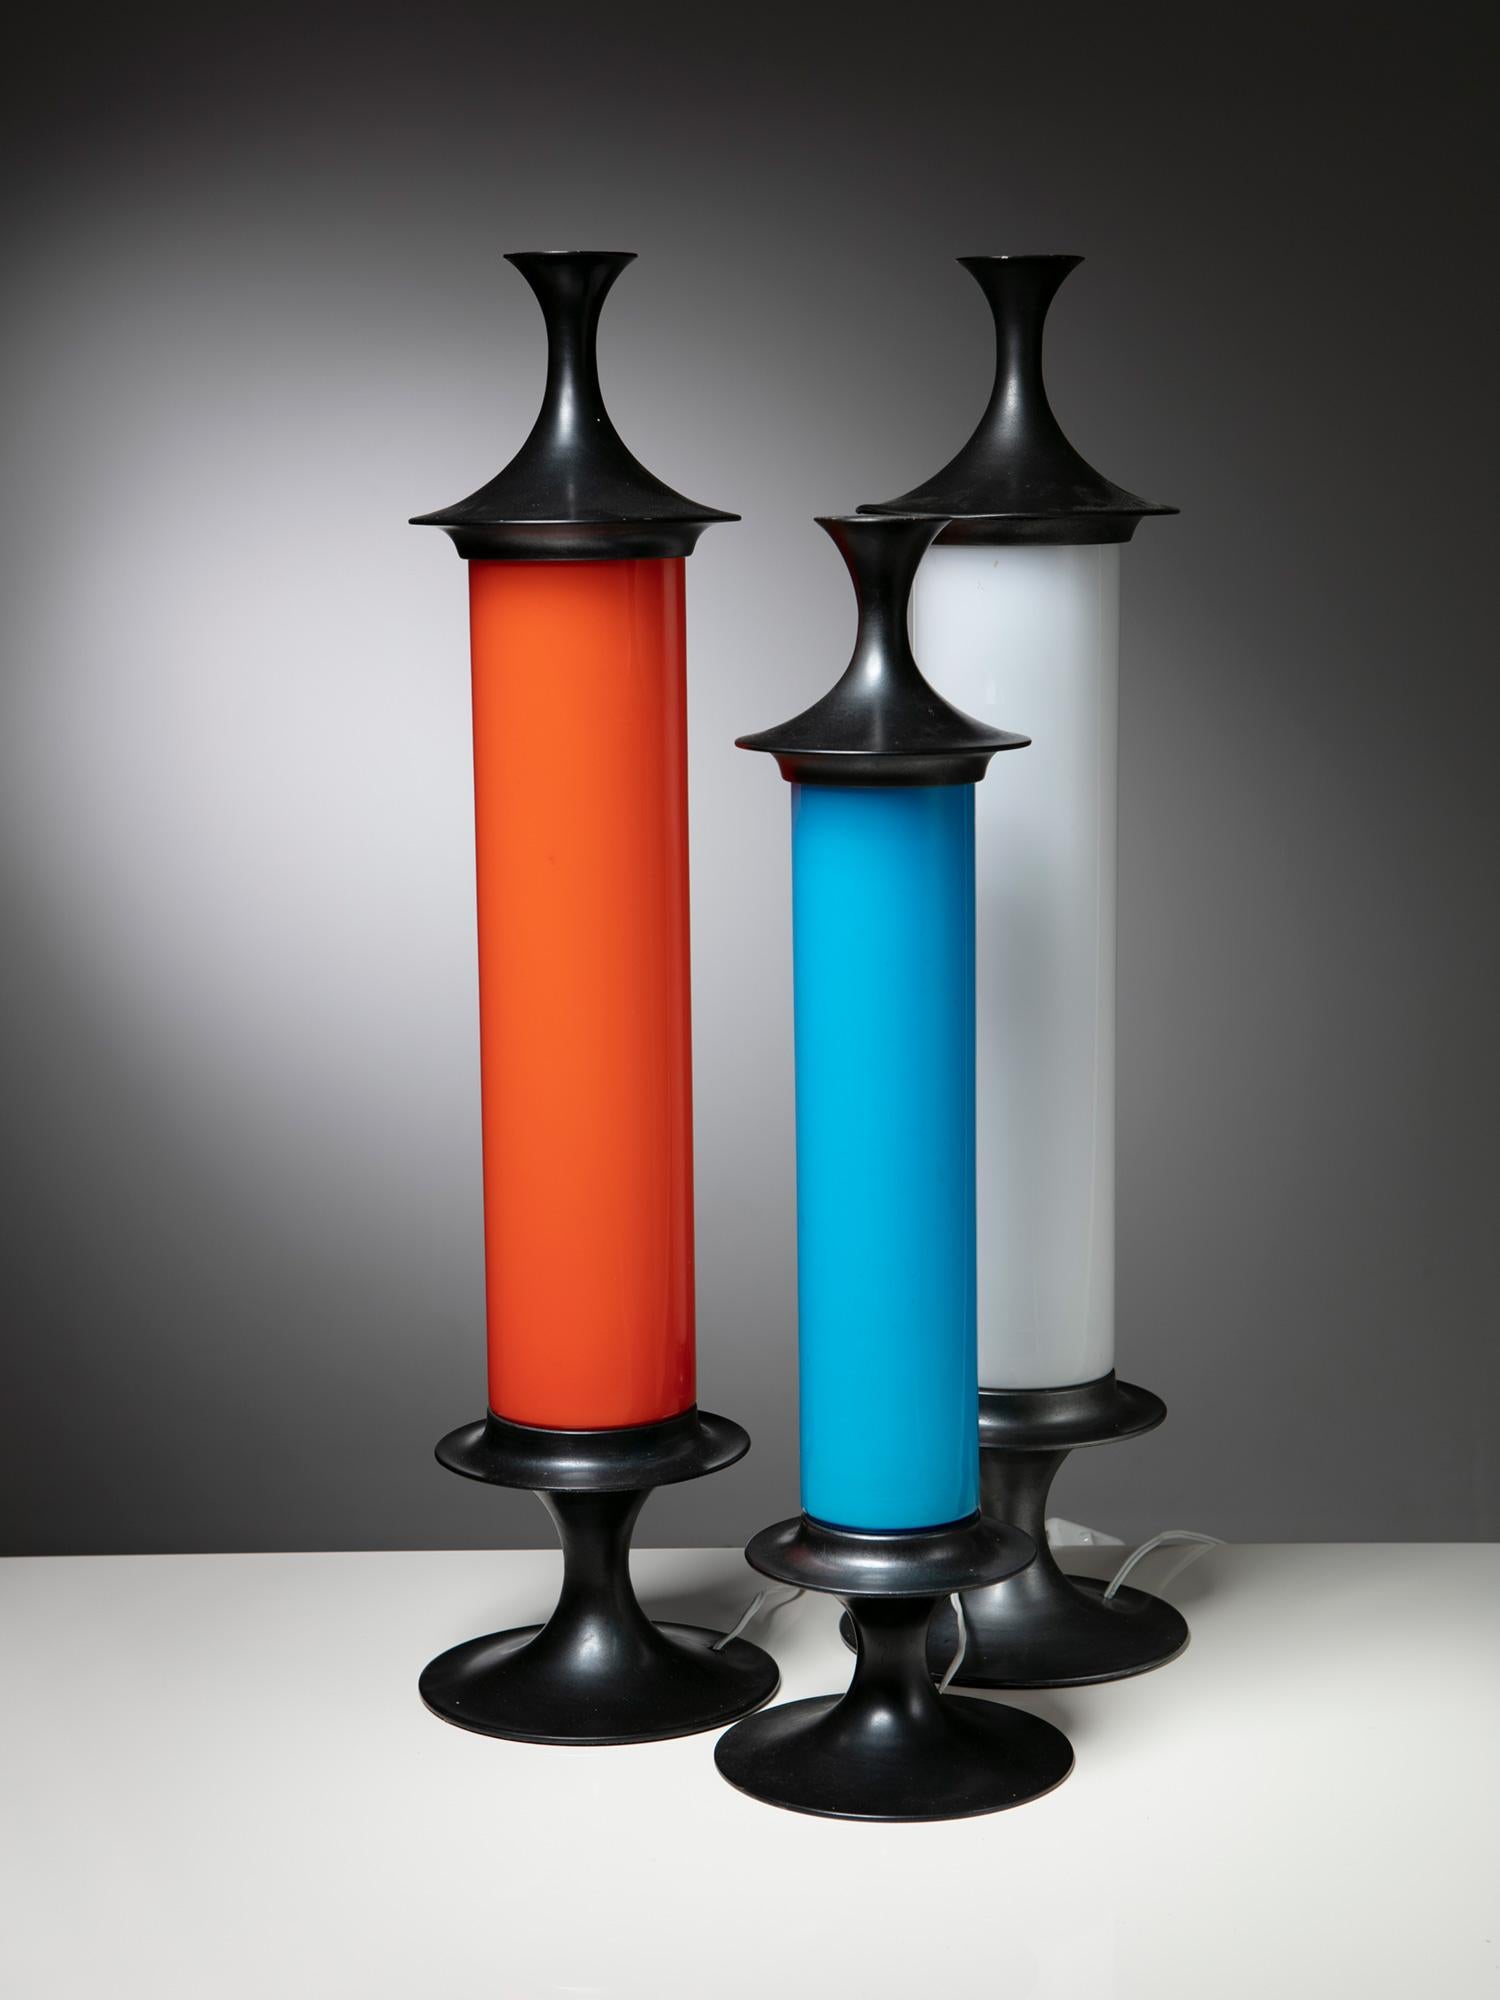 Rare set of three table lamps with colored glass and metal frame.
Slim shaped, work well together and alone as well.
Size refers to the tallest model.